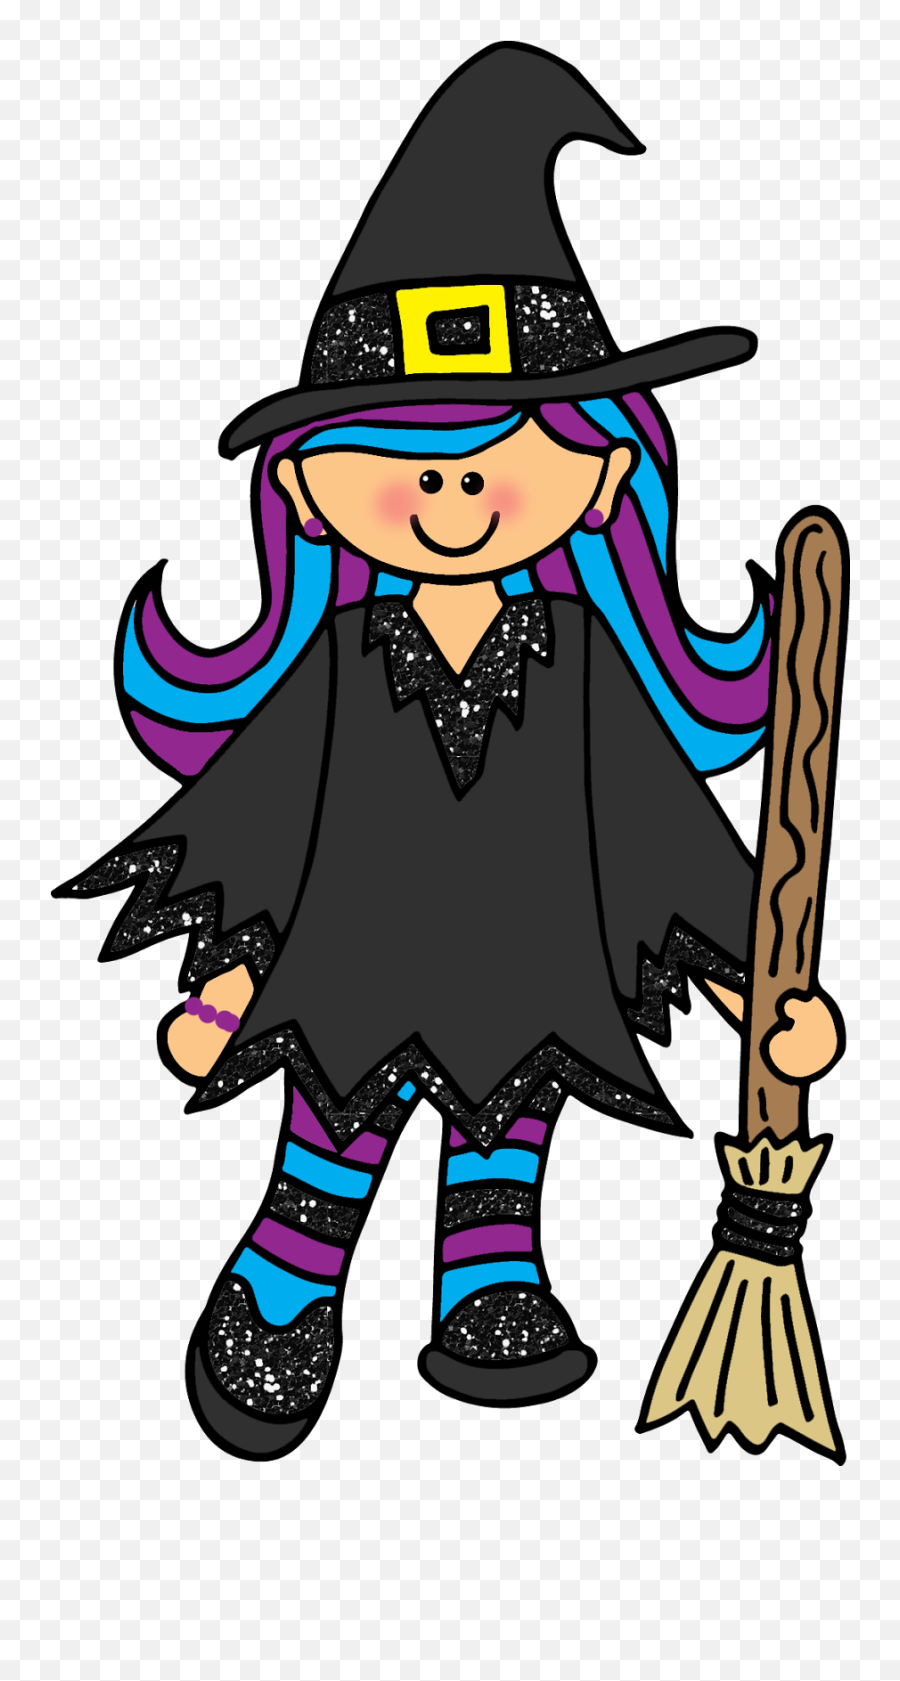 Friendly Witch Clipart Hvgj Nztoje - Clipart Suggest Emoji,Friendly Clipart